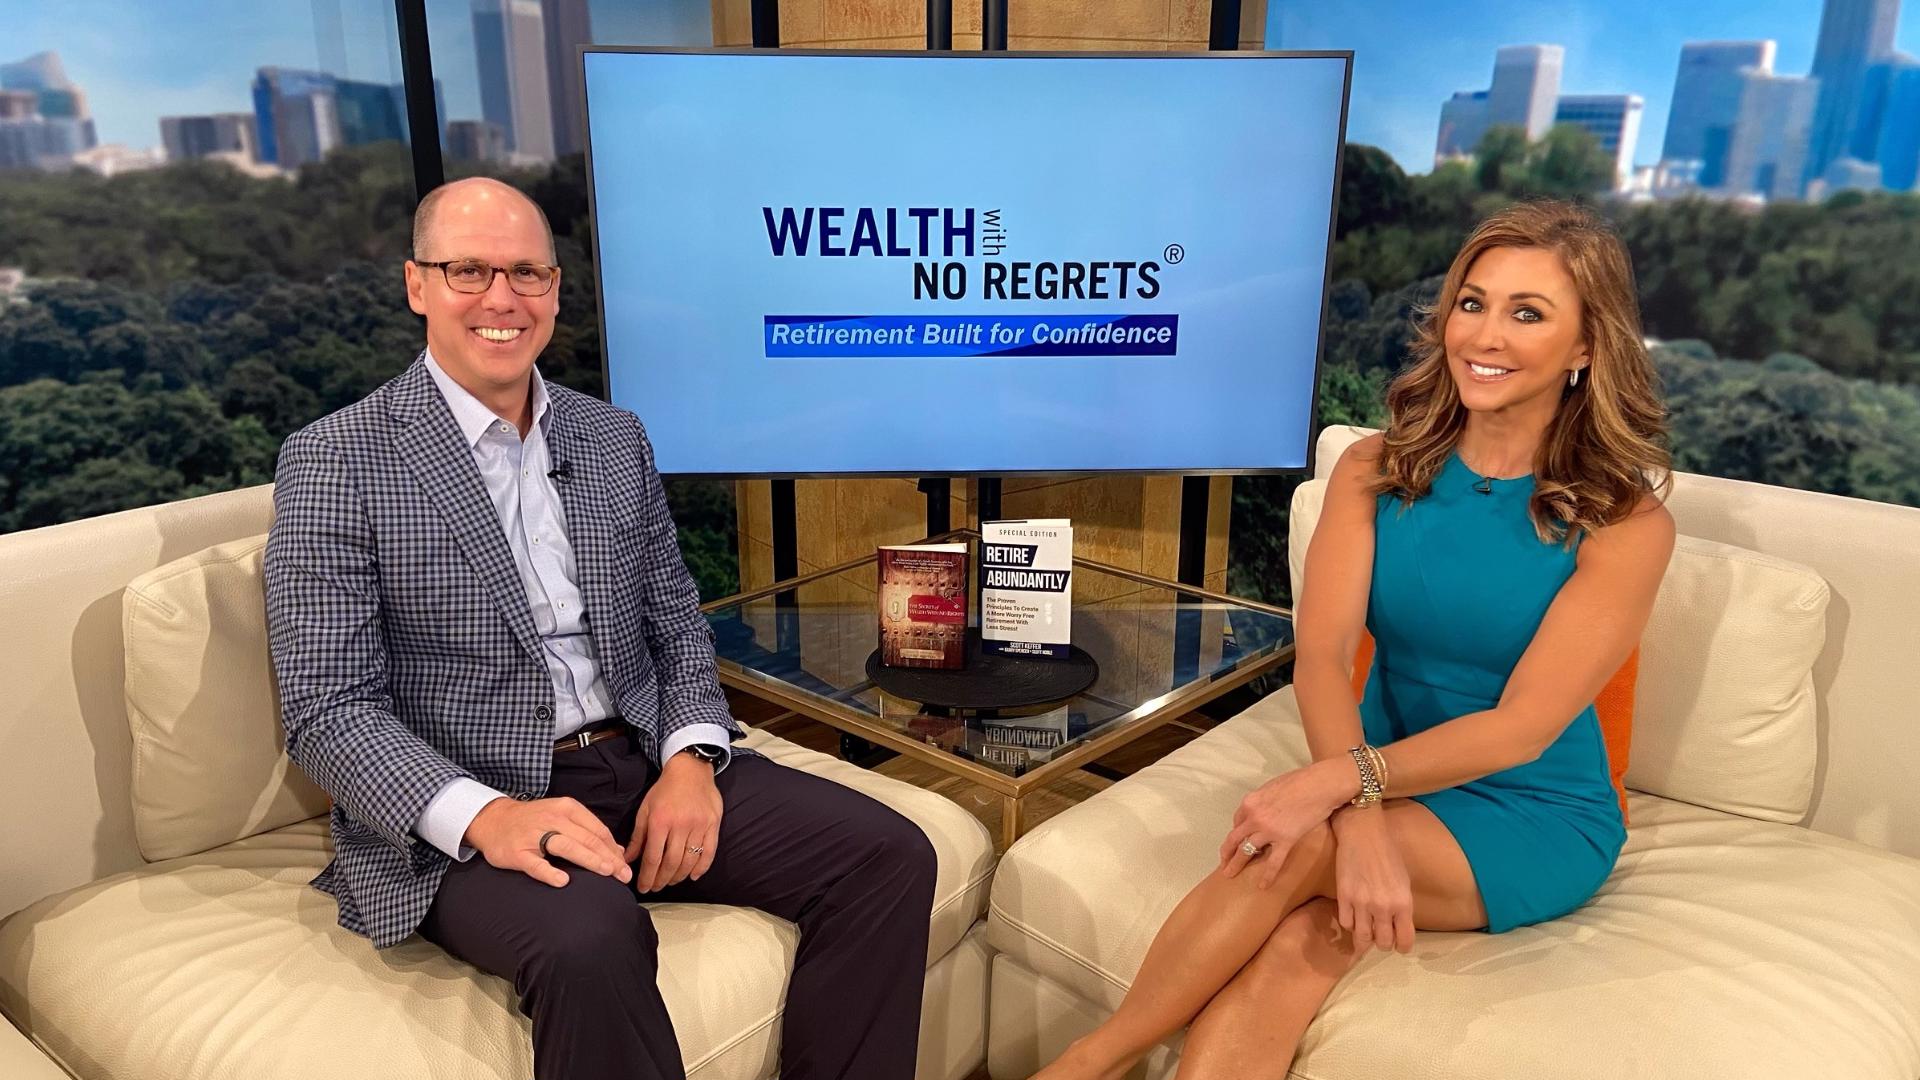 Retirement built for confidence! Get smart financial planning tips from Wealth with No Regrets CEO Barry Spencer.